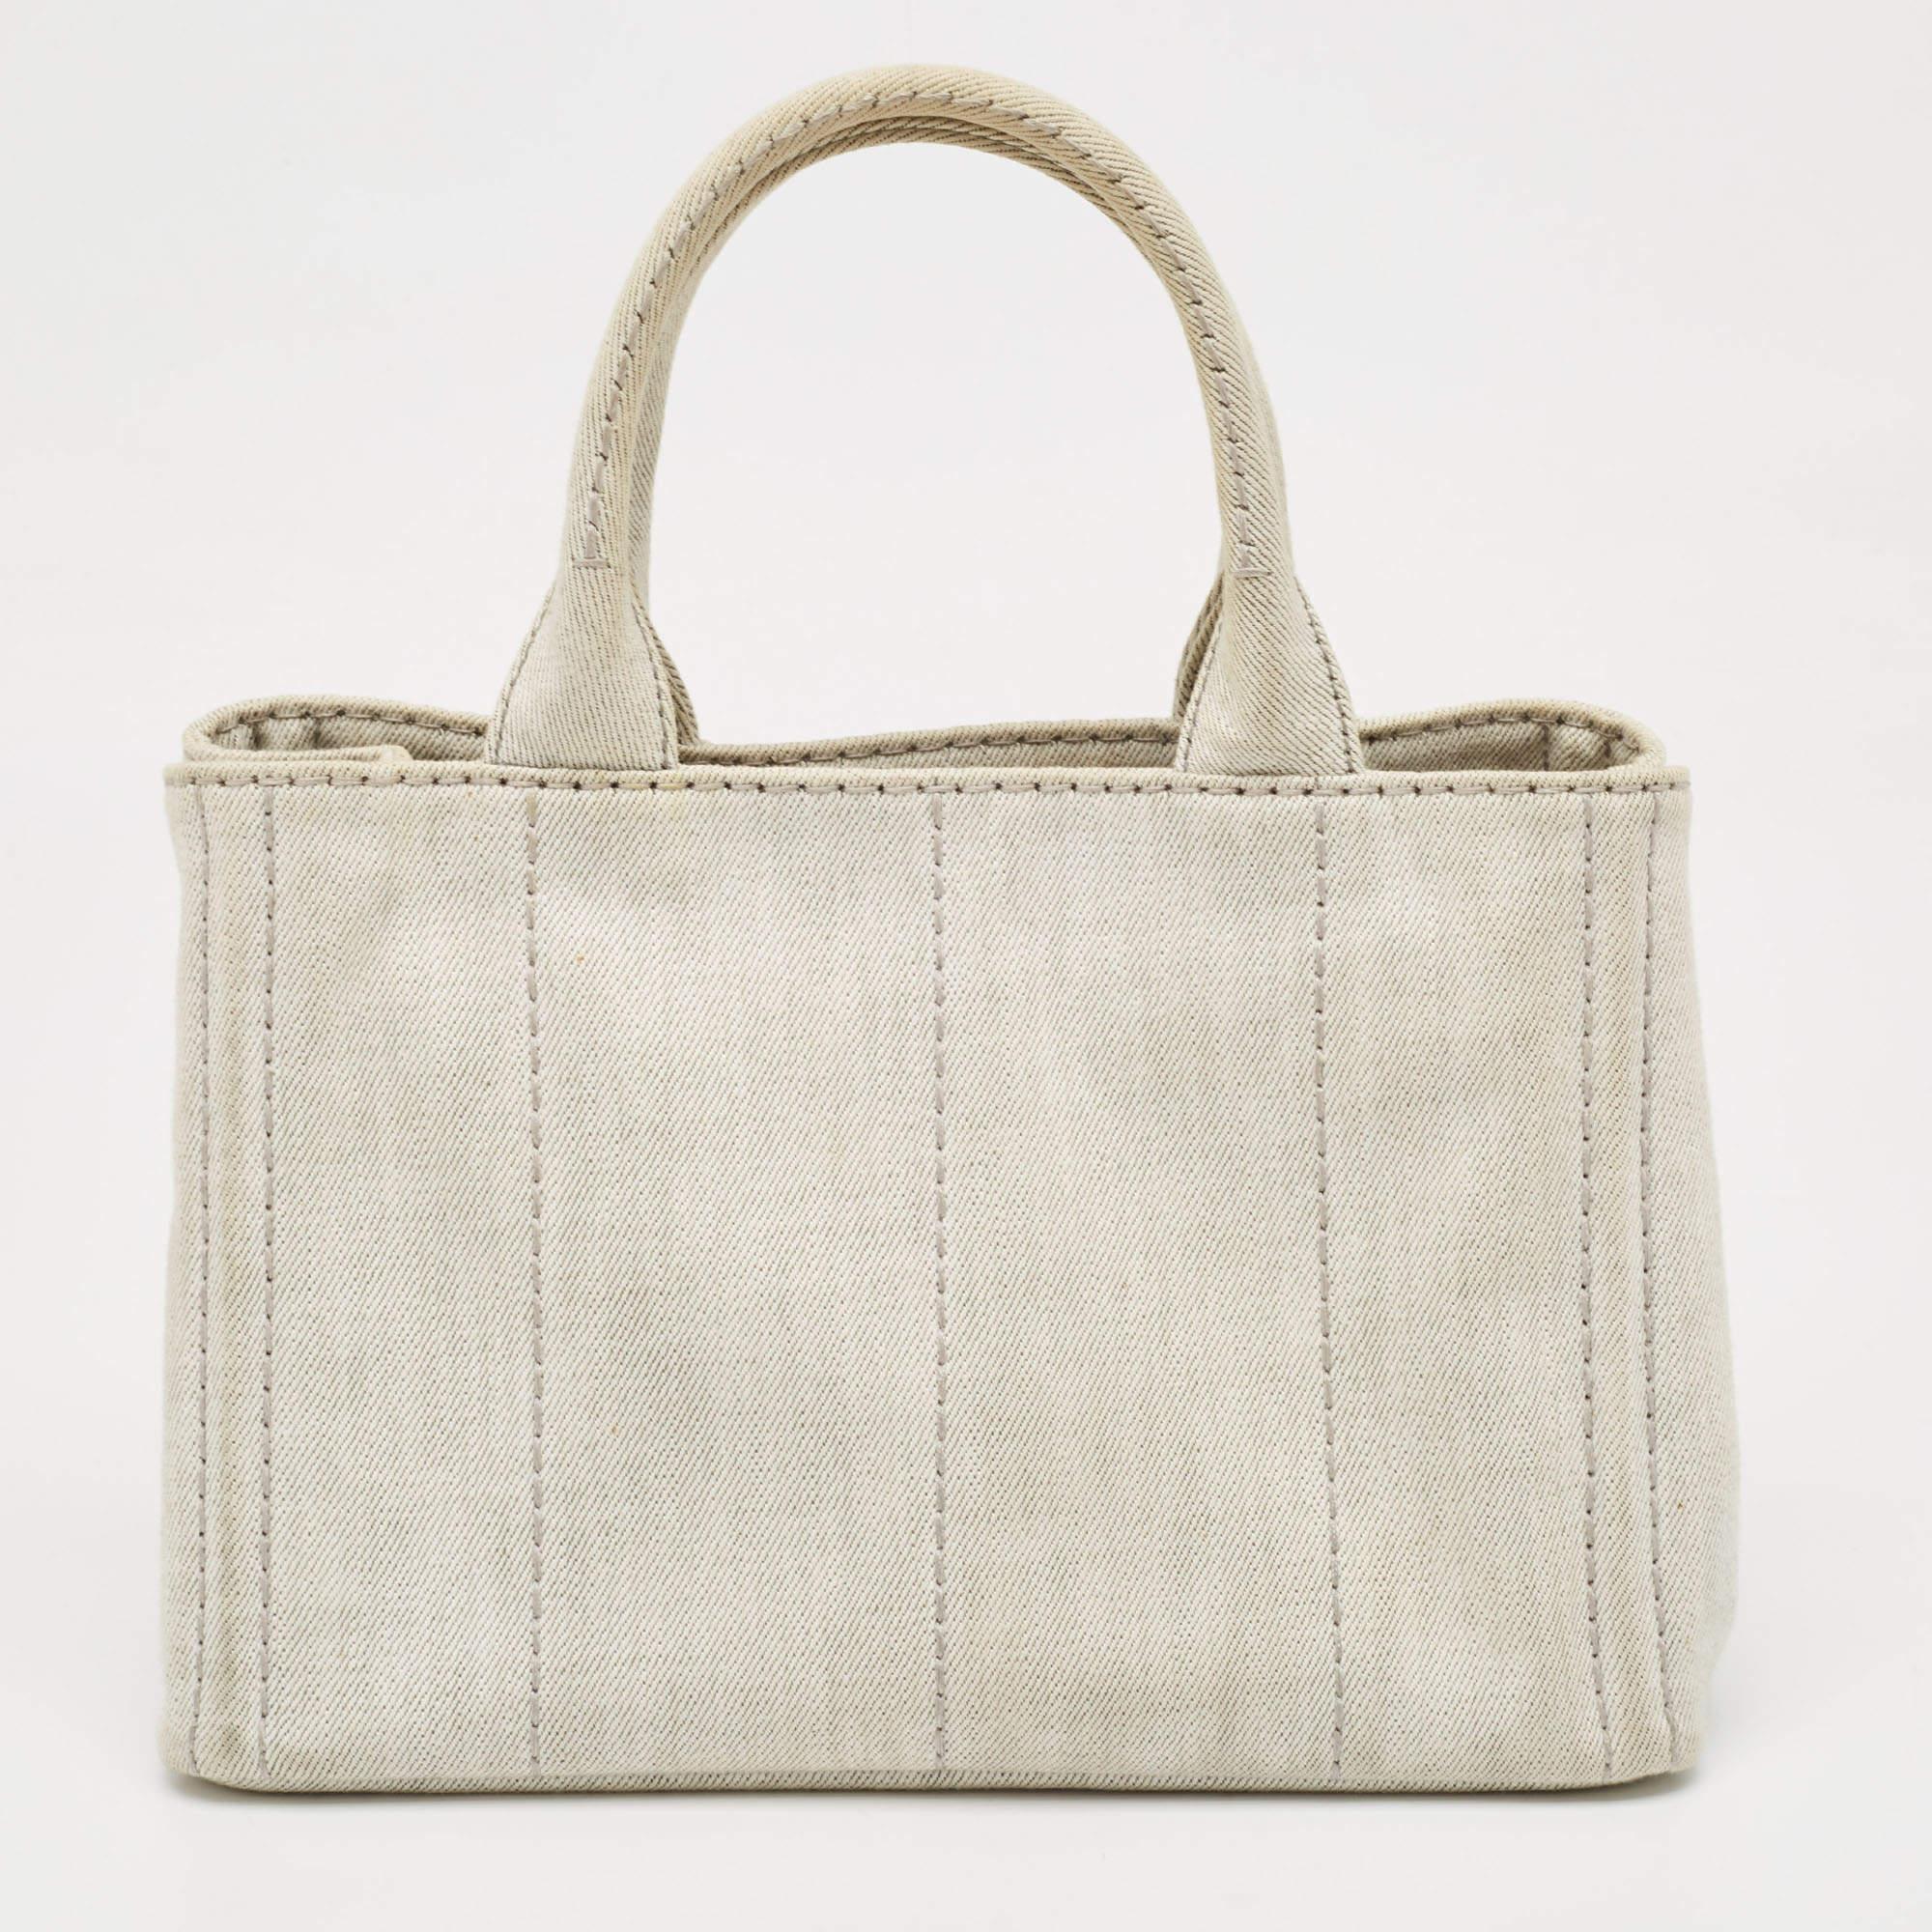 Created from high-quality materials, this tote is enriched with functional and classic elements. It can be carried around conveniently, and its interior is perfectly sized to keep your belongings with ease.

Includes: Original Dustbag, Authenticity